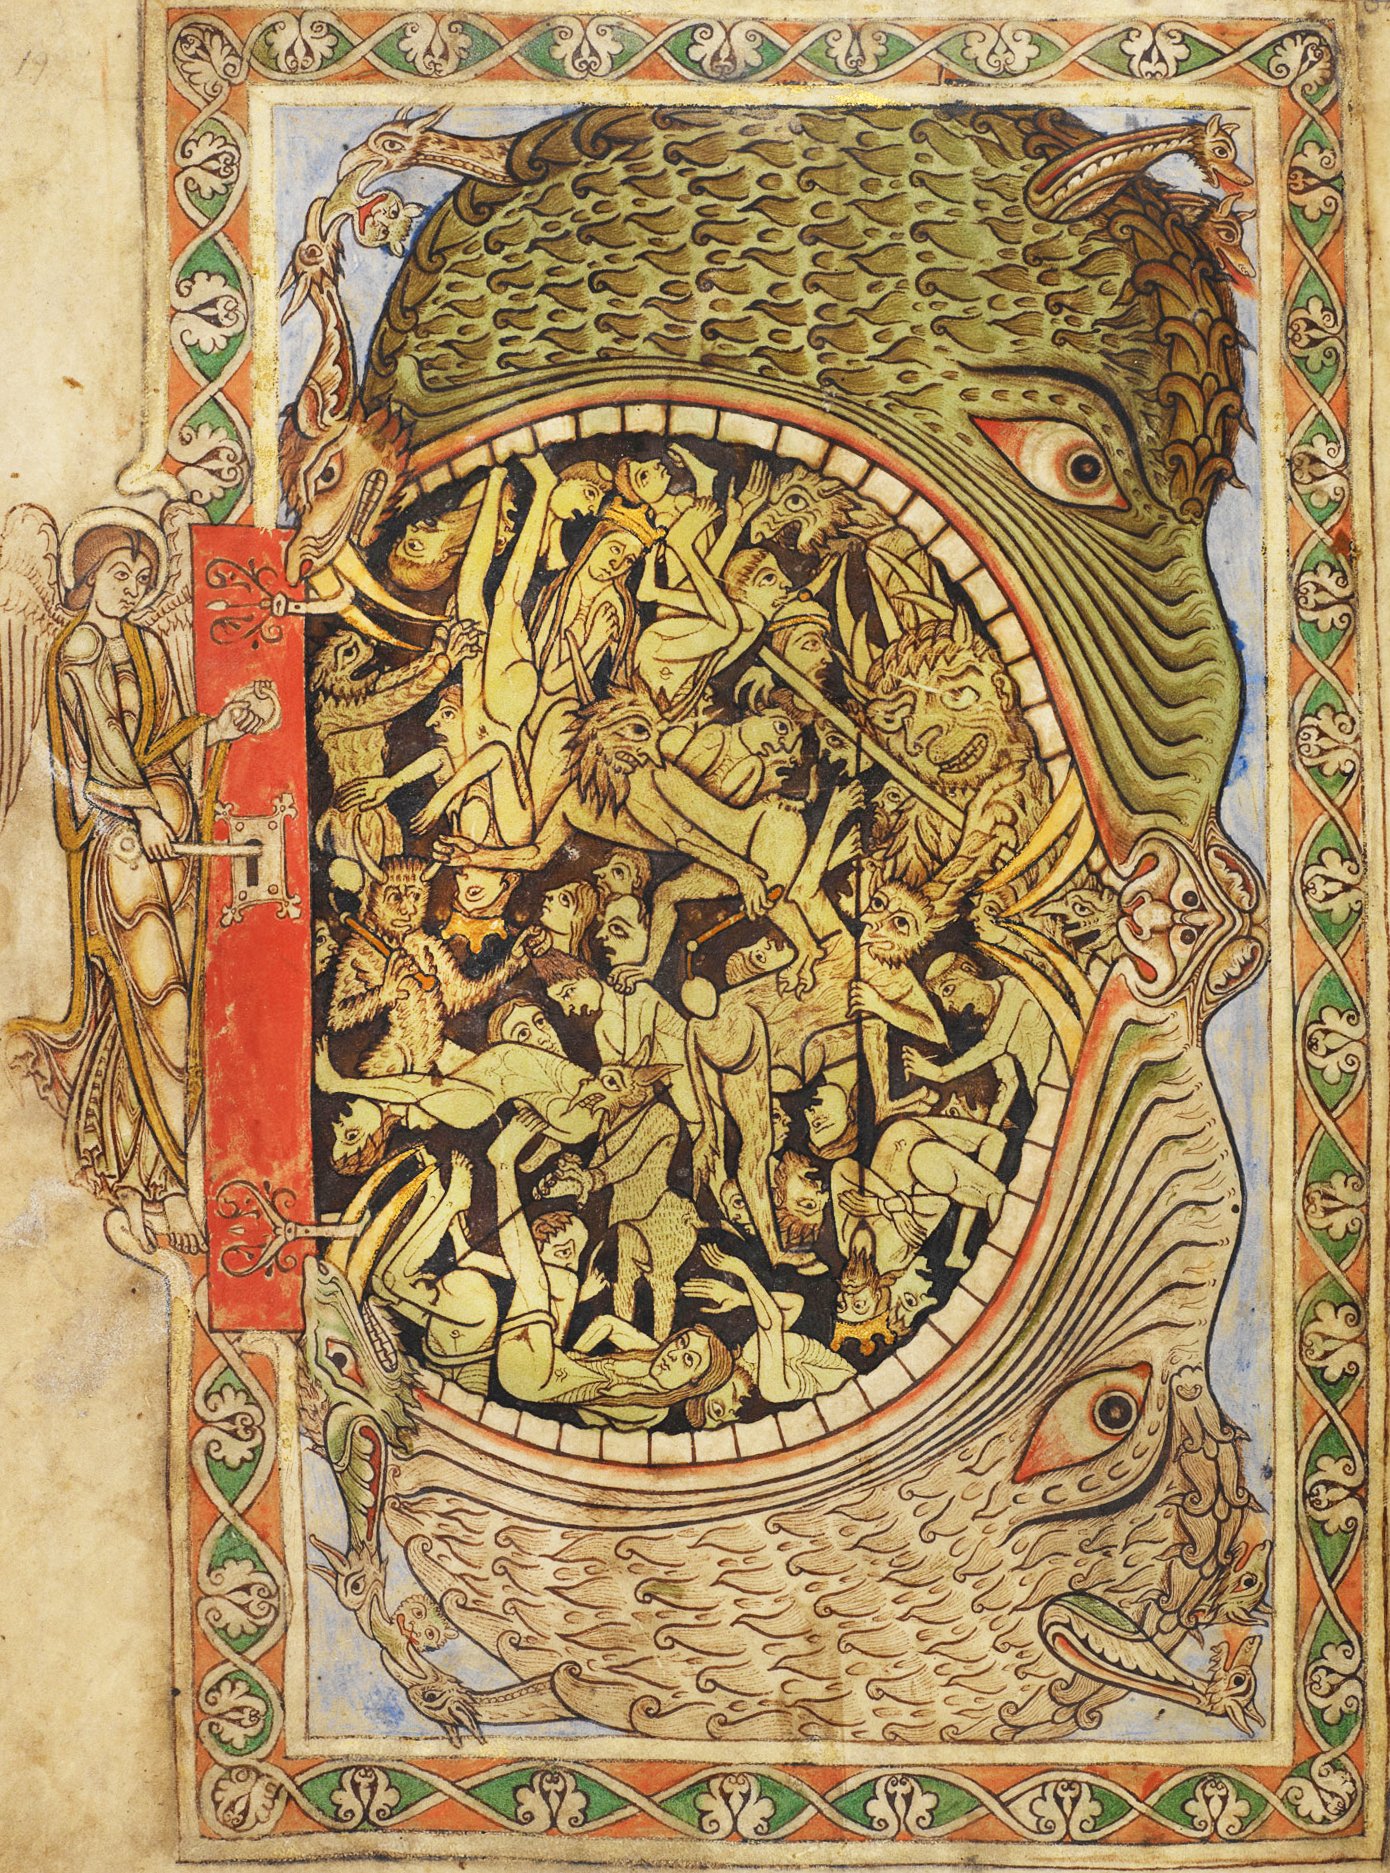 This is an image from the Winchester Psalter, depicting a medieval concept of Hell. The central feature is a large, monstrous mouth with sharp teeth, known as a "hellmouth," swallowing the damned. The figures are drawn in various poses of distress and are entangled with each other, illustrating the chaos and despair of Hell. Some figures are being tormented by demons, while others appear to be tumbling into the abyss. The hellmouth is situated within a frame, and the entire scene is bordered by intricate patterns and designs. On the left side, an angel operates a winch to open the mouth of Hell, signifying the divine judgment that consigns souls to this fate. The detailed illustration serves as a stark representation of medieval beliefs about the afterlife and moral consequence.